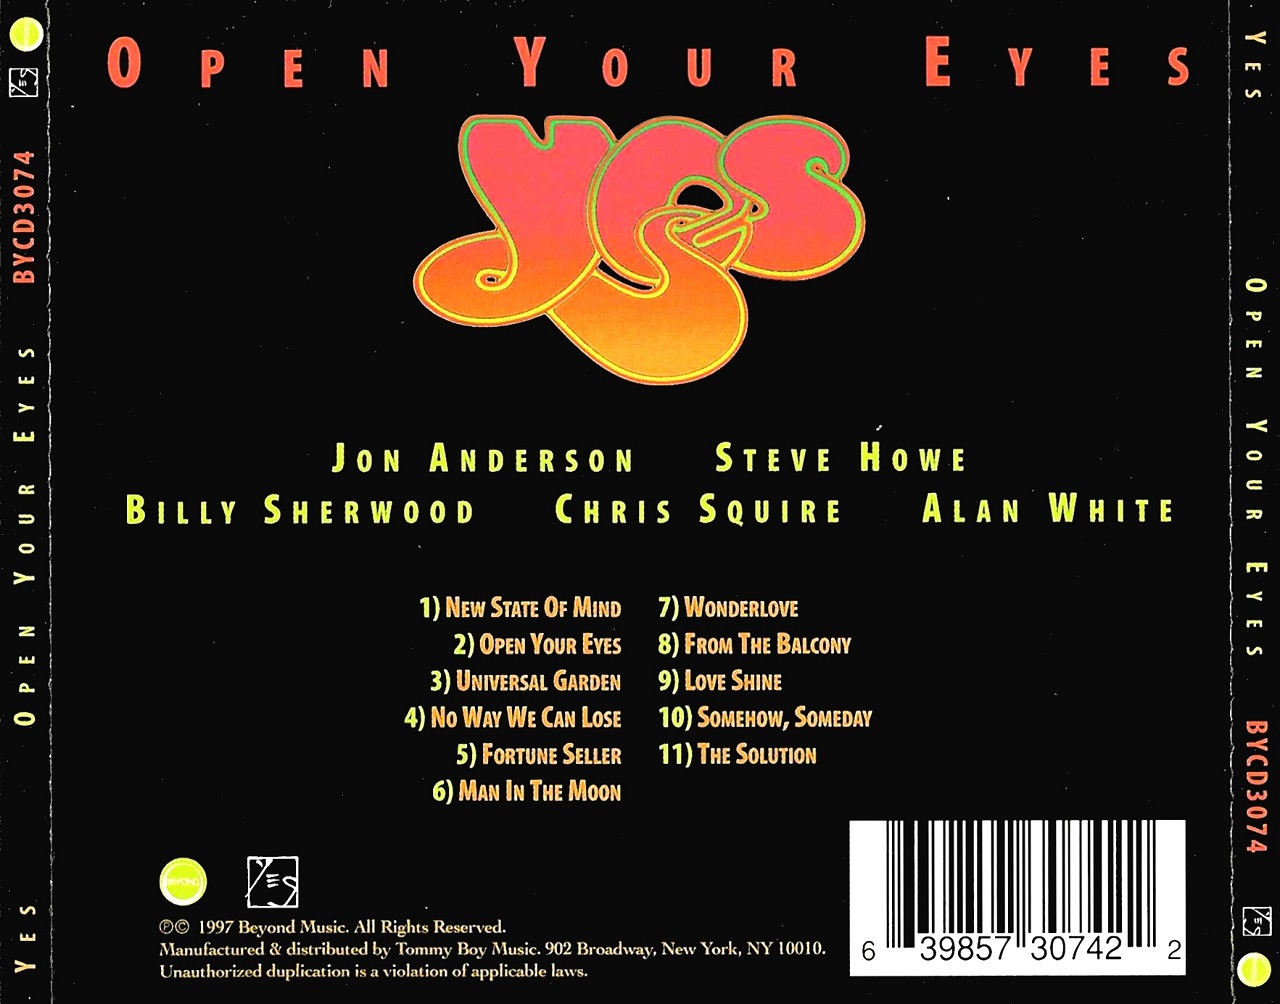 yes open your eyes tour dates